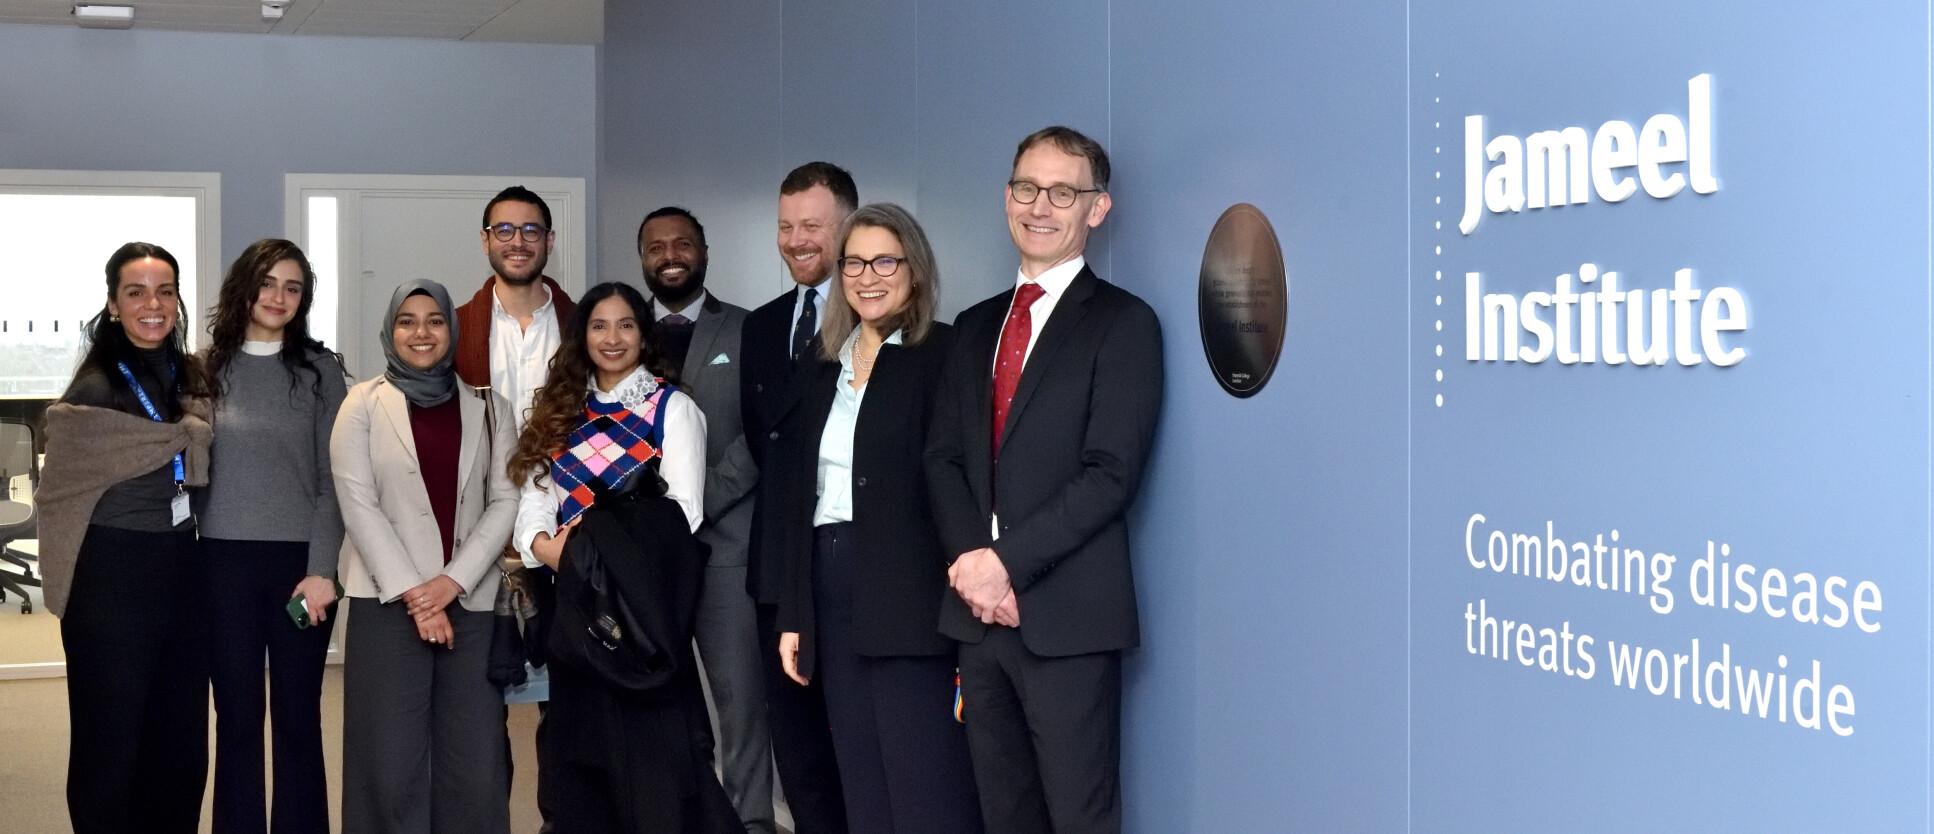 9 smartly dressed people stand proudly in their new office with big smiles on their faces. A sign on the wall reads Jameel Institute / Combating disease threats worldwide.